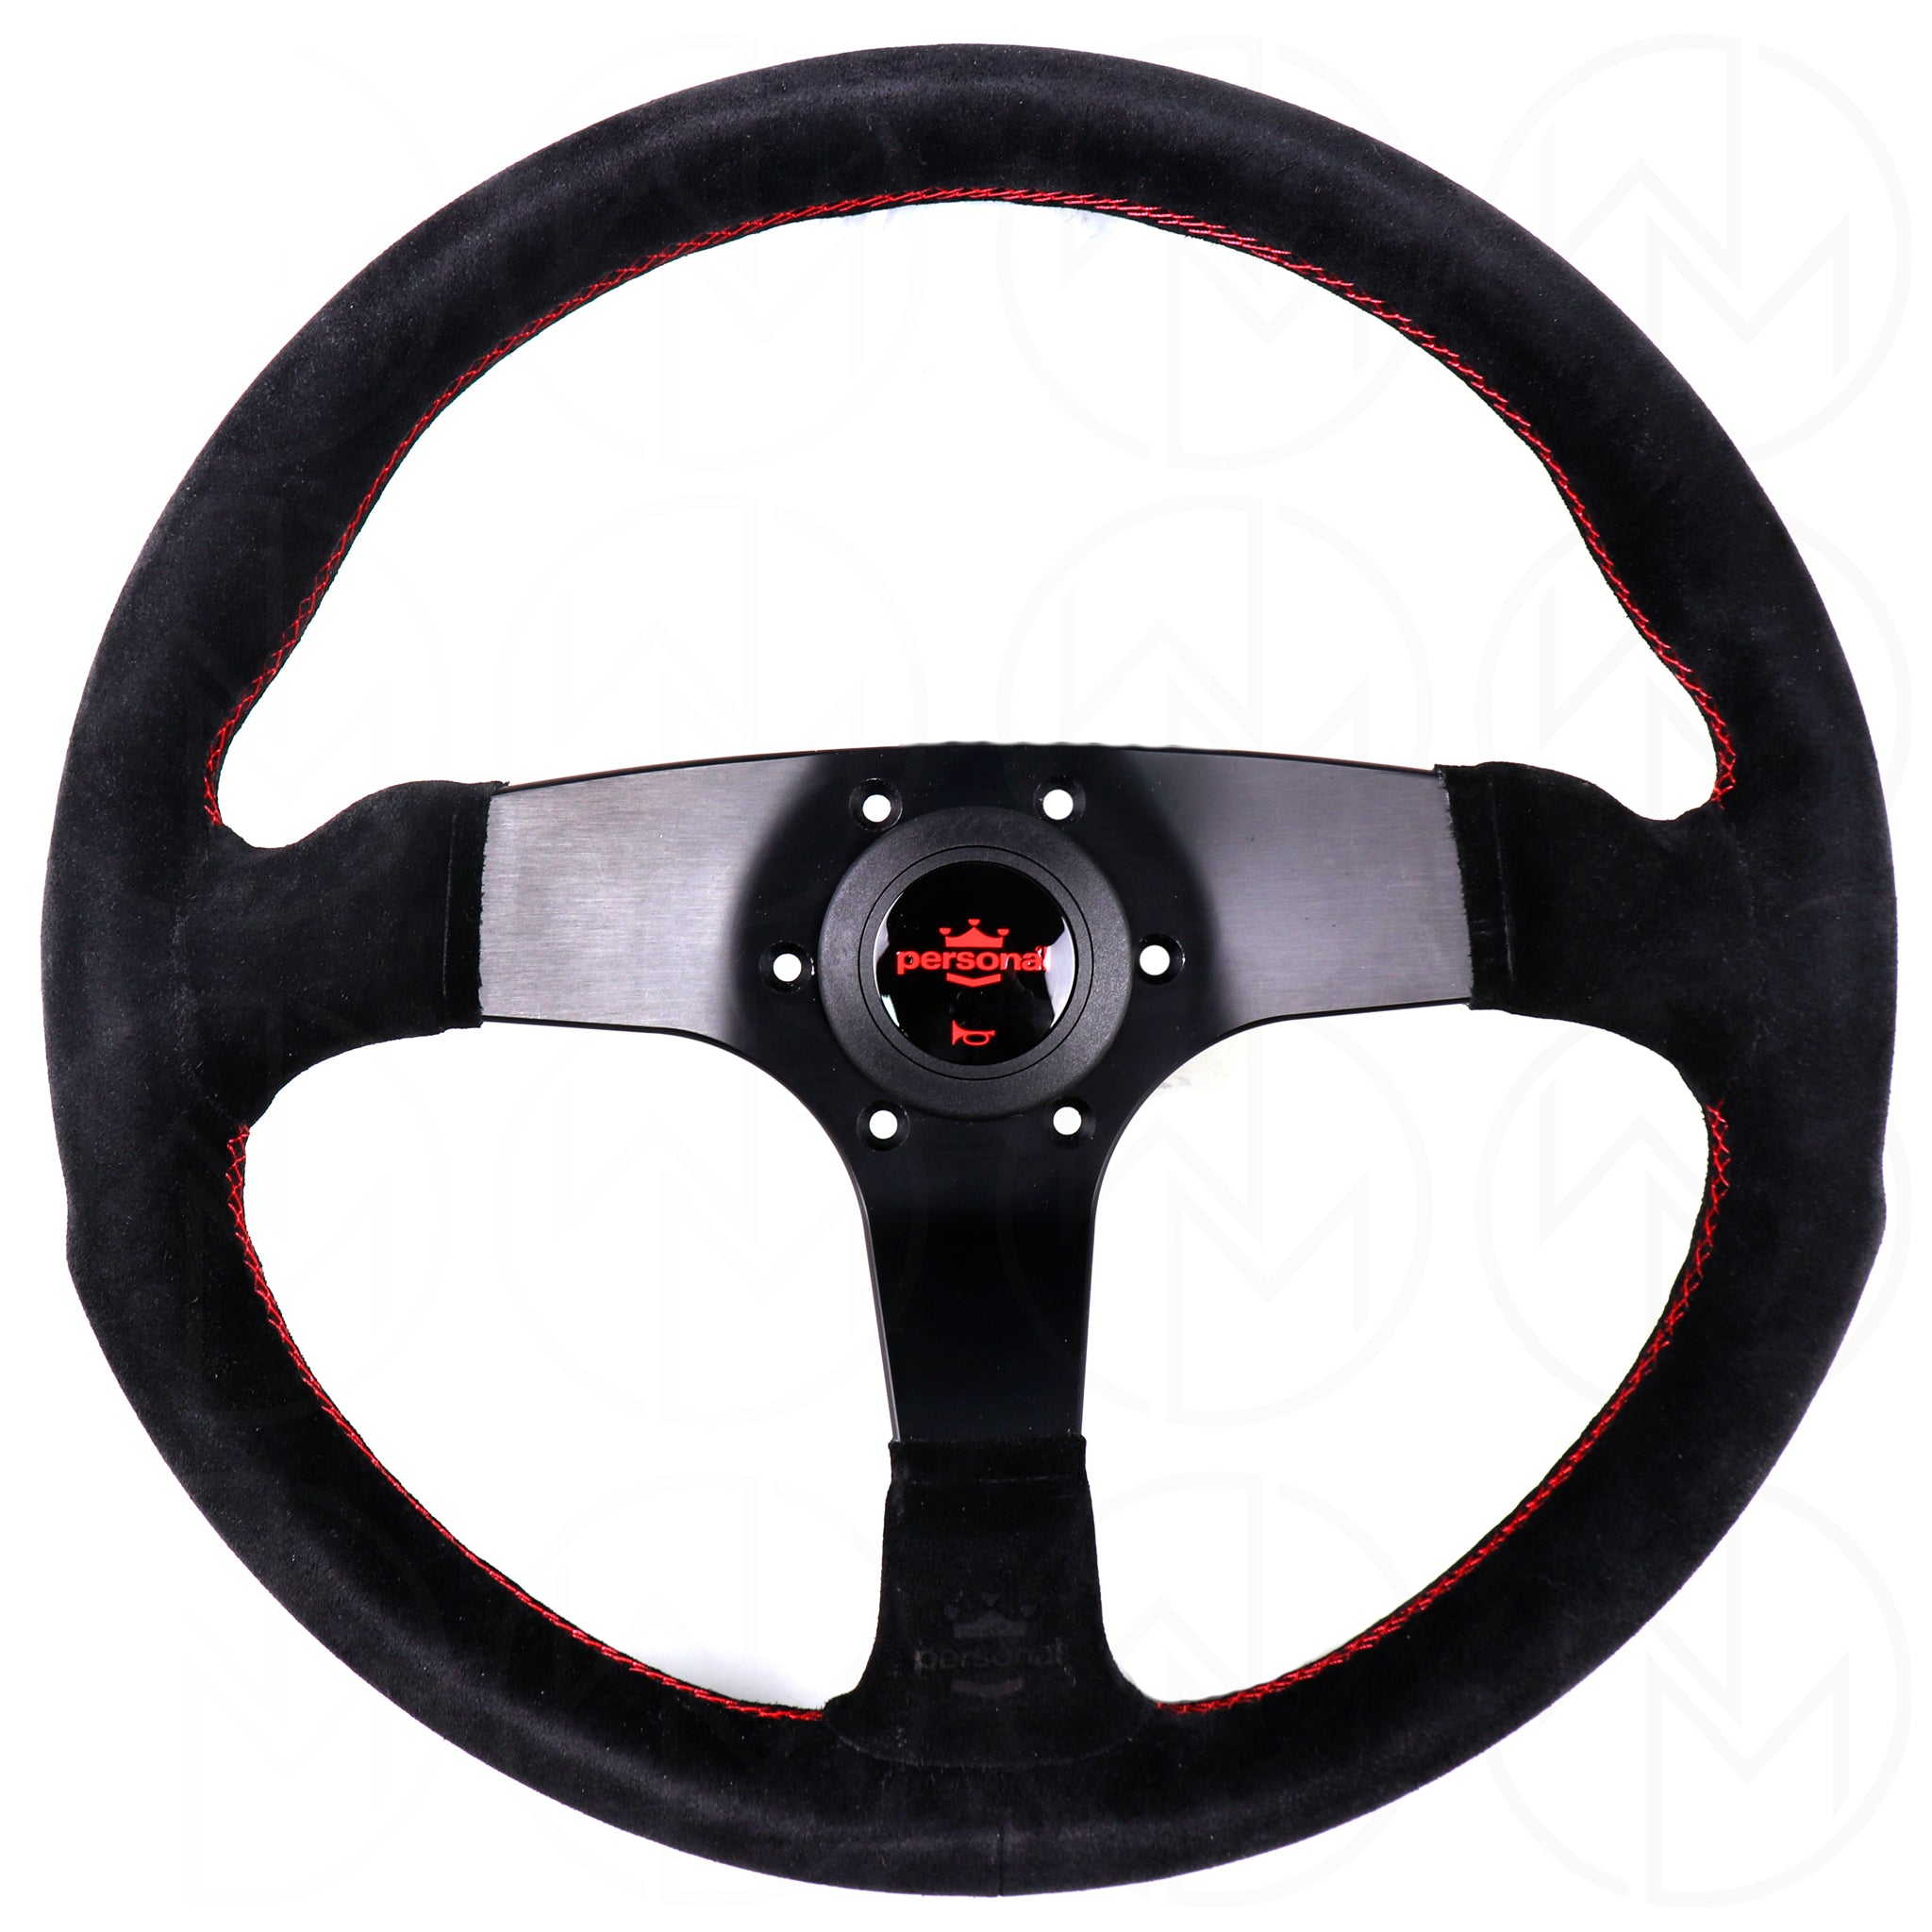 Personal Fitti Corsa Steering Wheel - 350mm Suede w/Red Stitch